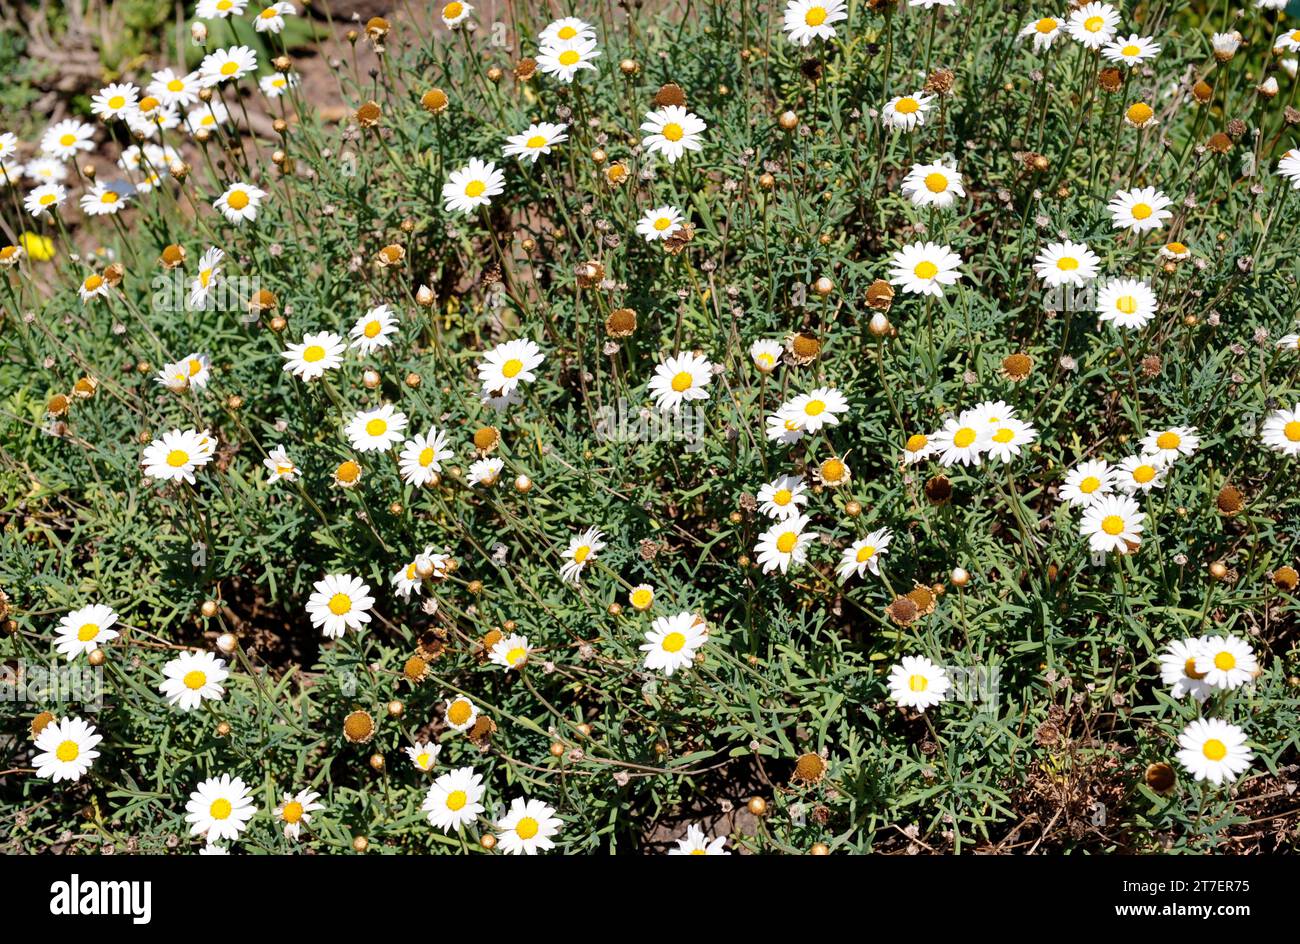 Magarza comun (Argyranthemum frutescens) is a perennial plant endemic to Canary Islands. Stock Photo